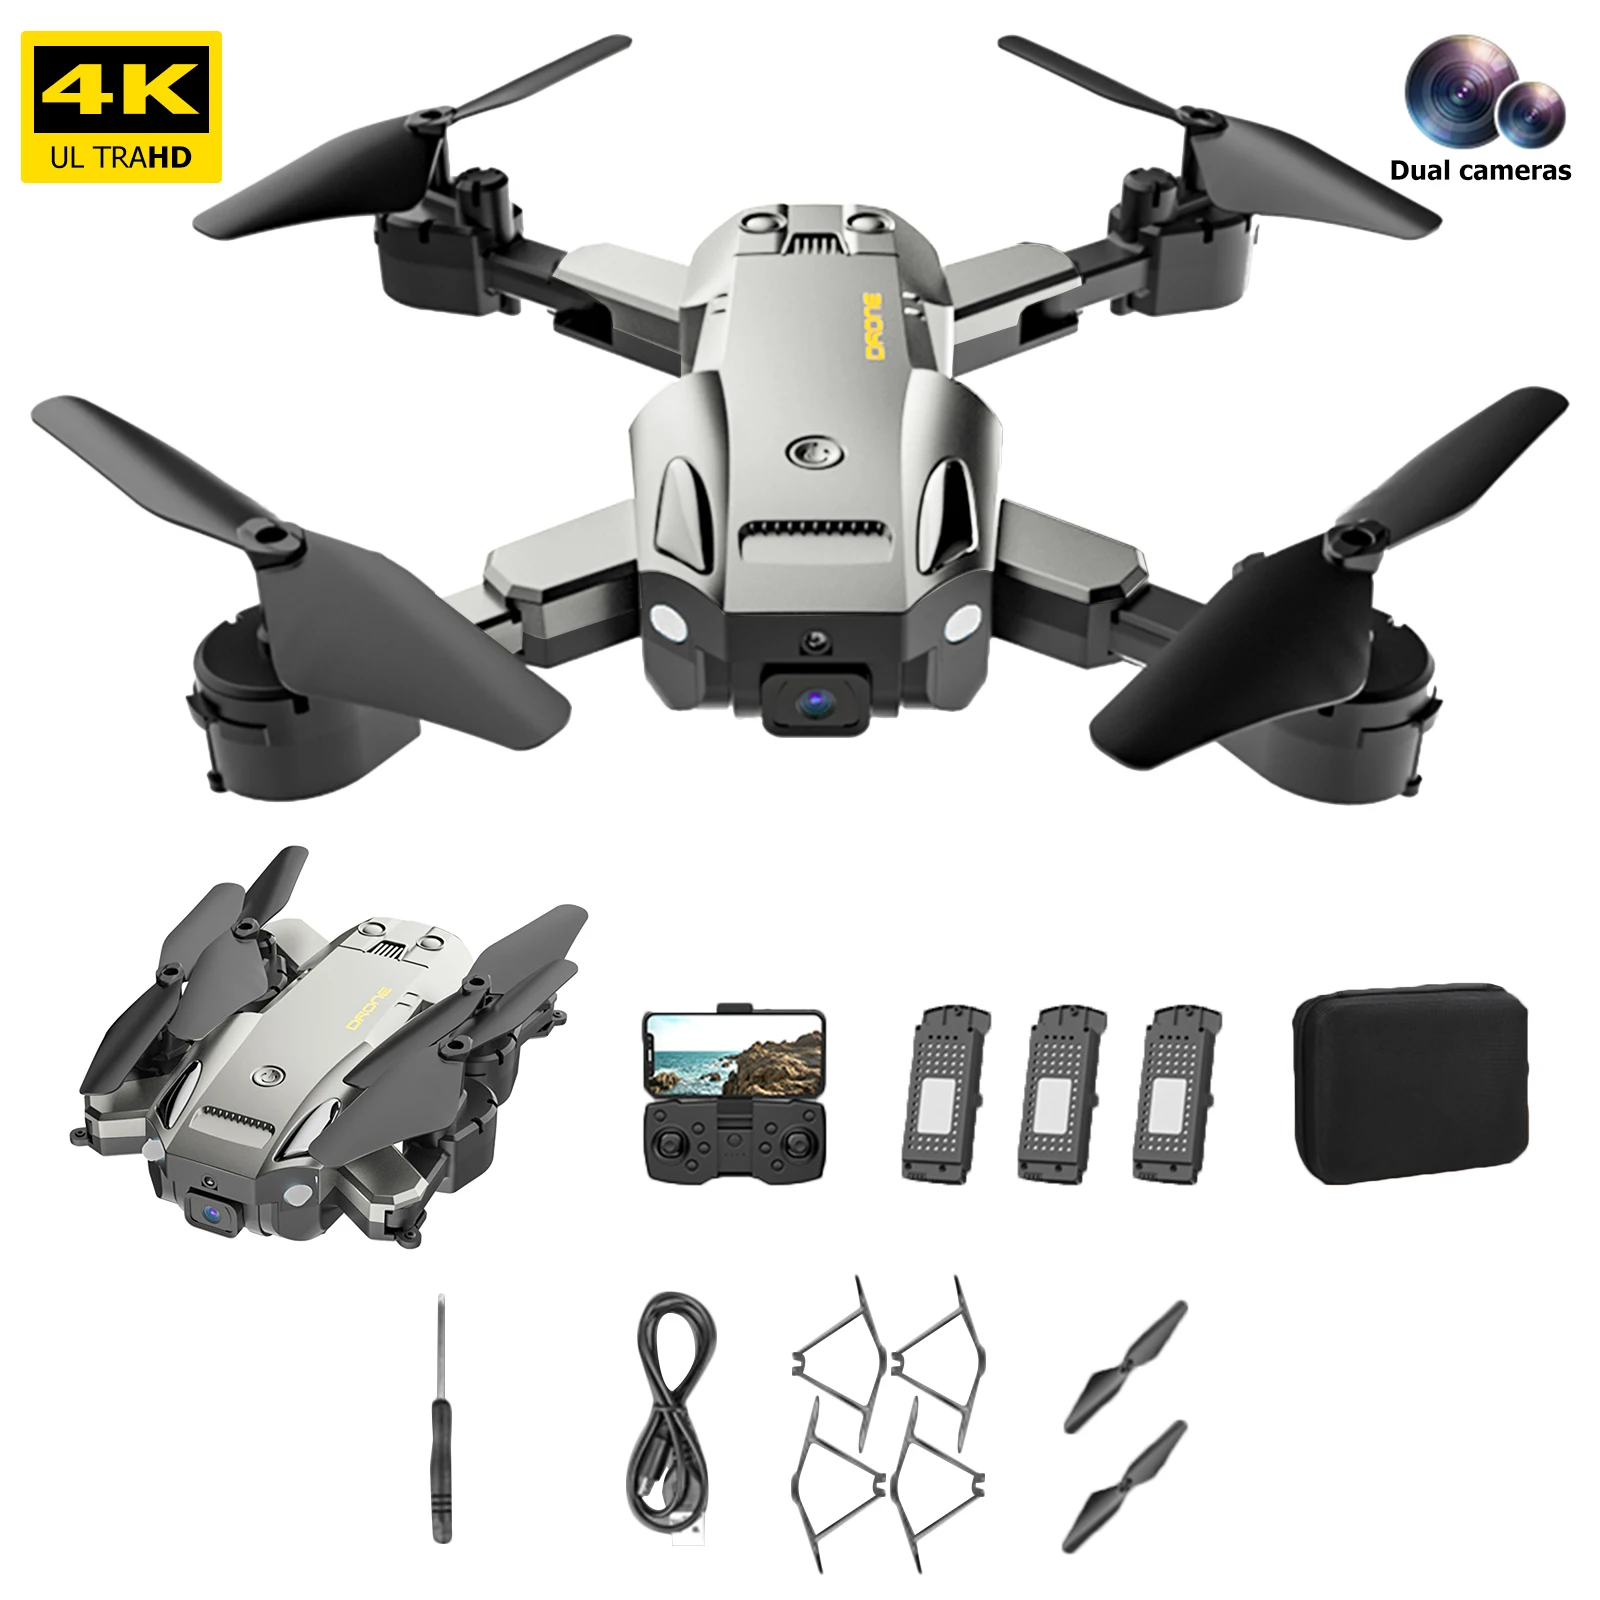 

4K HD Camera FPV RC Drone Aerial Photography 2.4GHz 4CH FPV Drone Quadcopter 3D Flip Headless Mode Altitude Hold with LED Lights